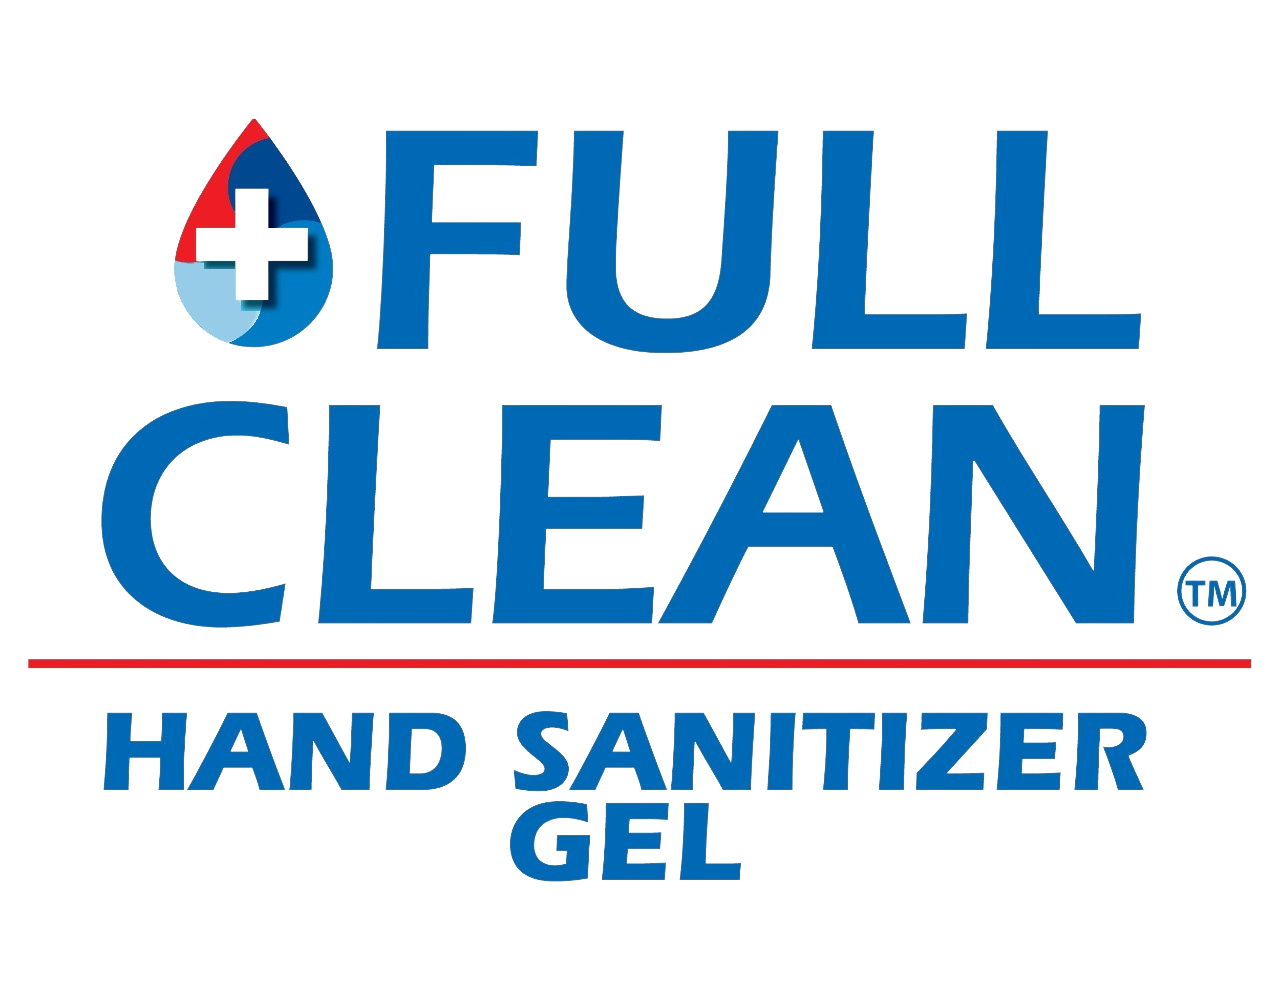 Full Clean Introduces All-Natural Full Clean Hand Sanitizer Proven to Kill 99.9 Percent of Germs in Just 15 Seconds